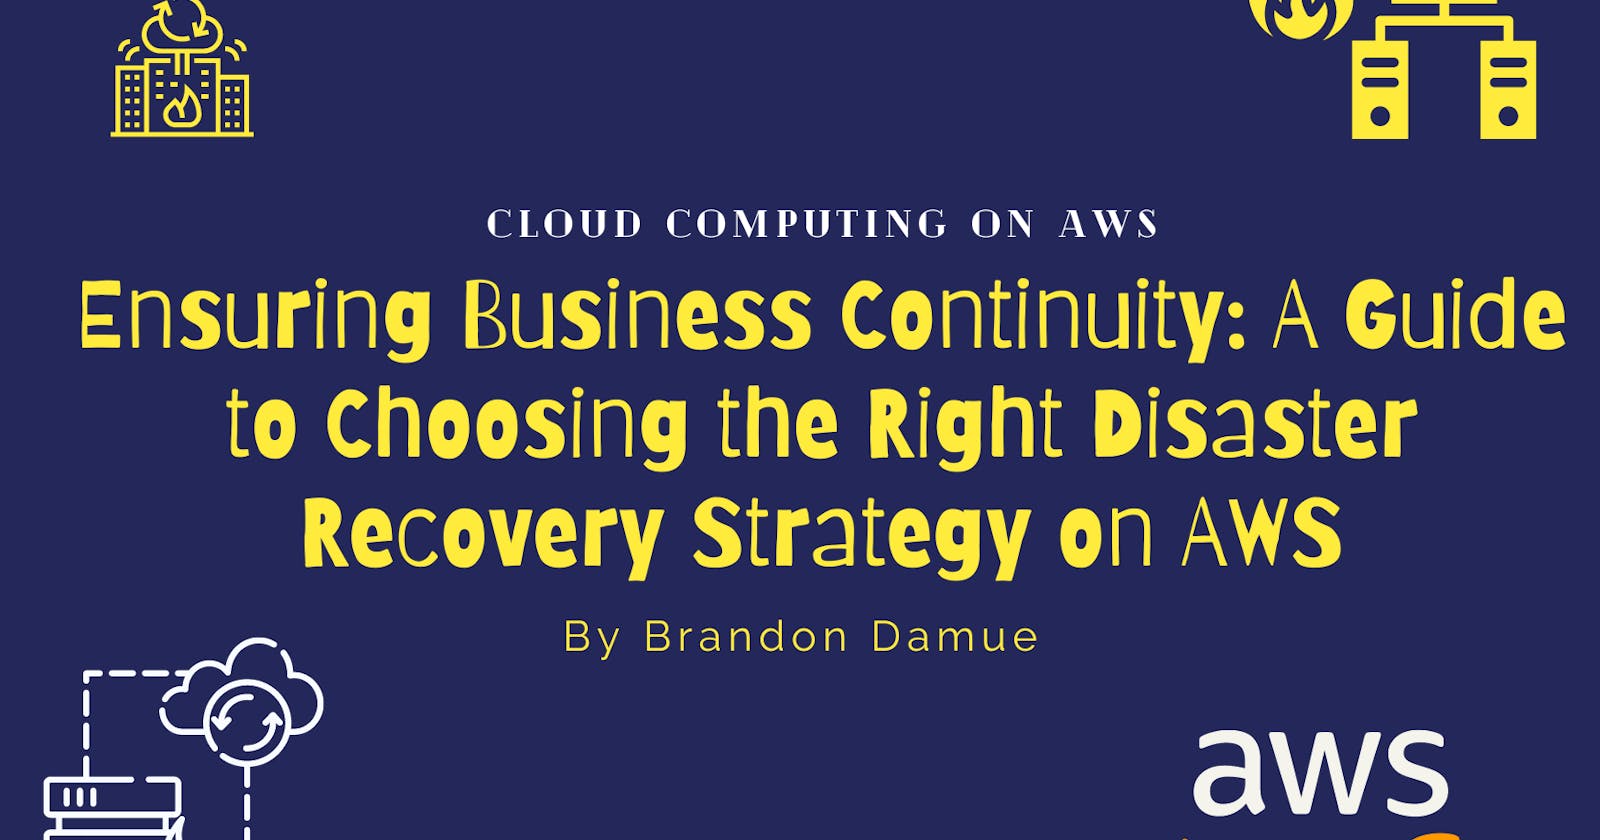 Ensuring Business Continuity: A Guide to Choosing the Right Disaster Recovery Strategy on AWS